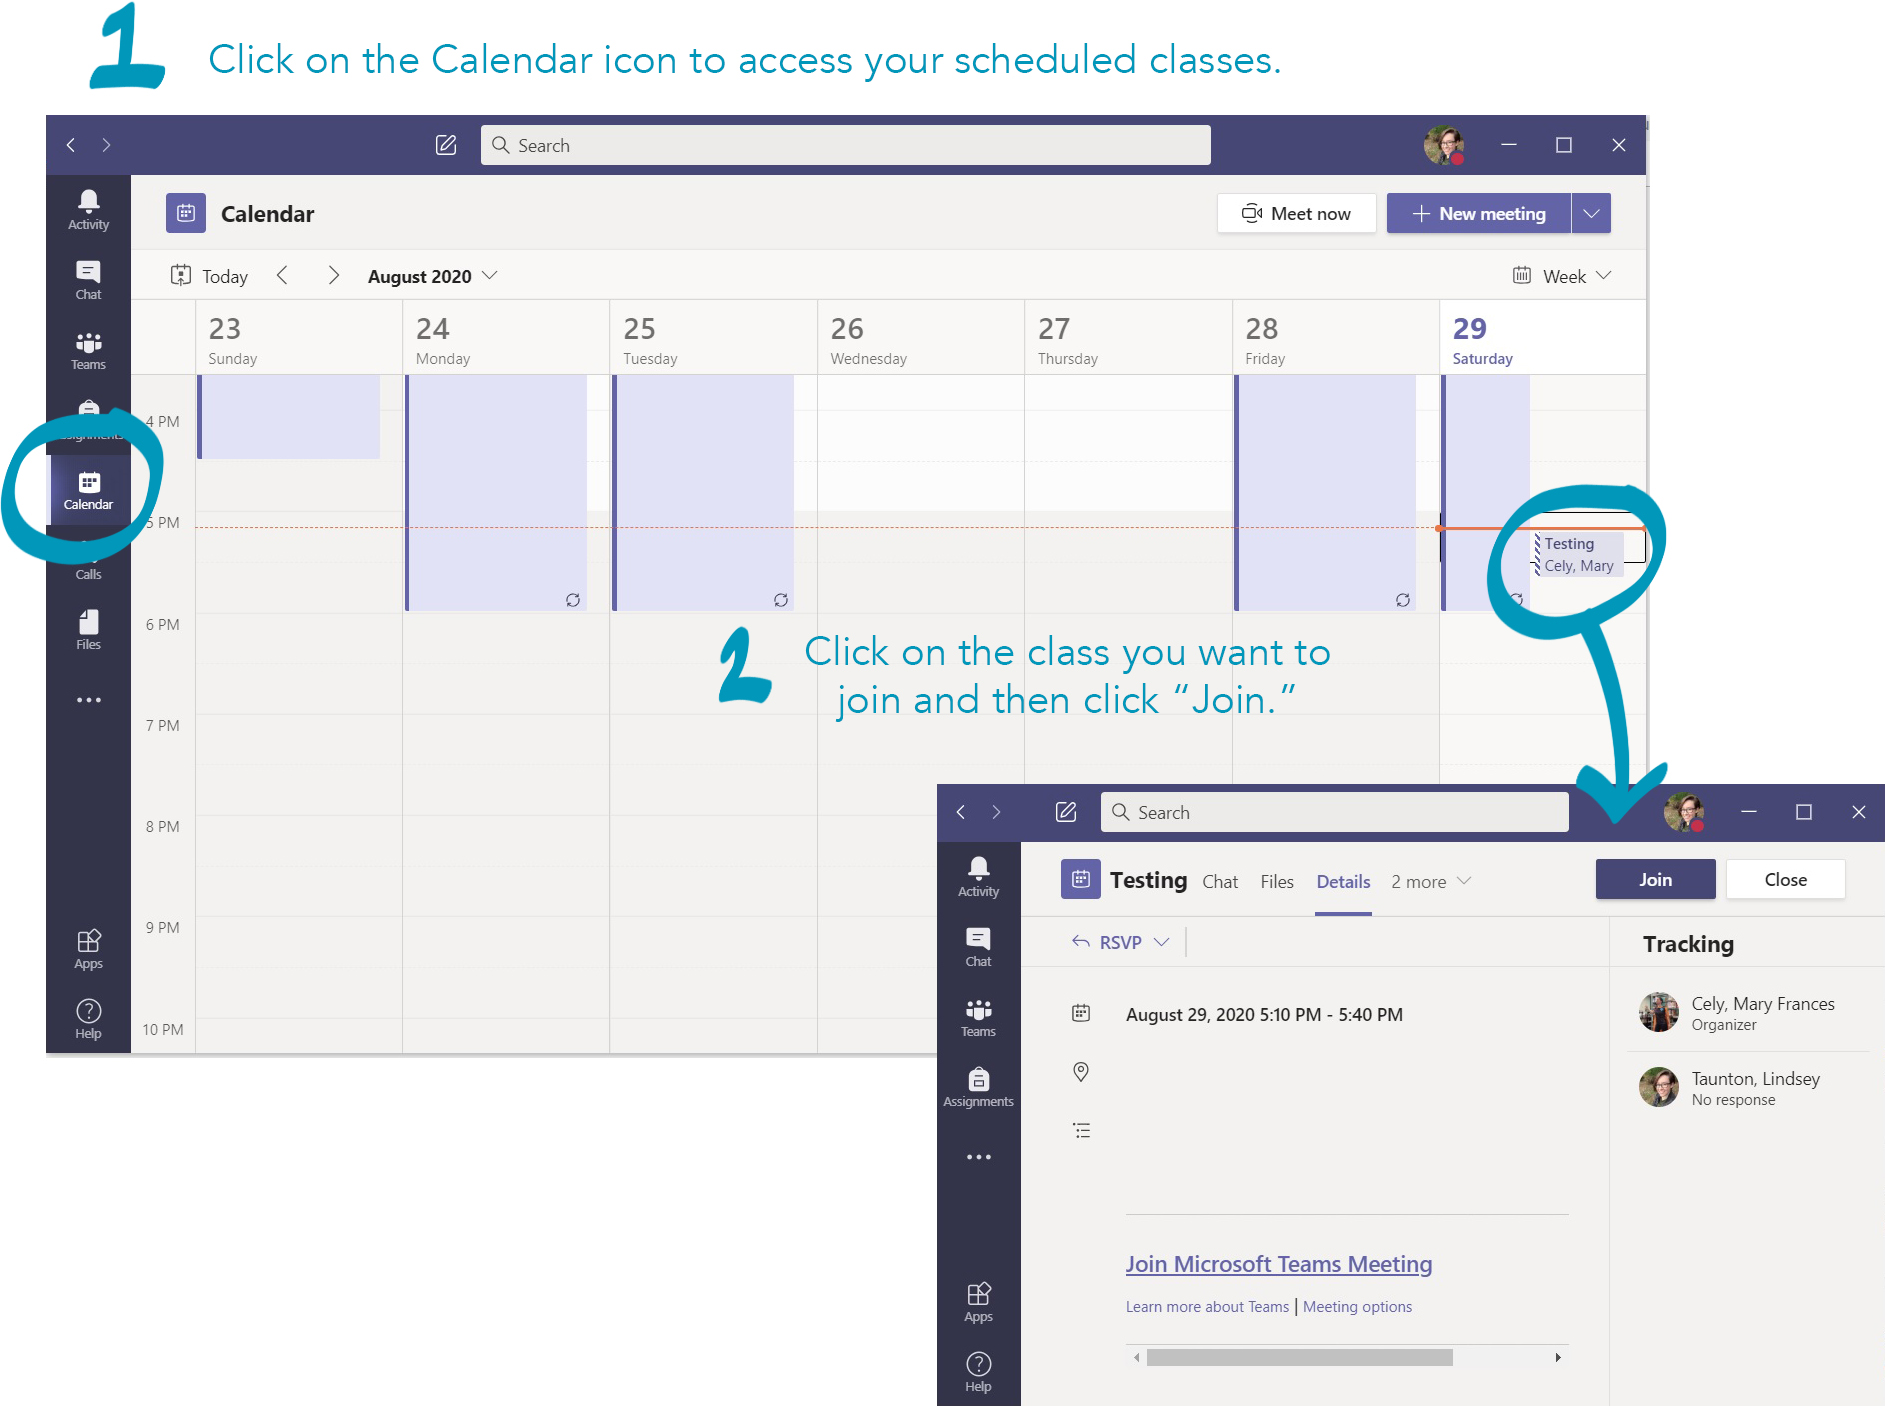 Joining scheduled classes by clicking on the class in Calendar